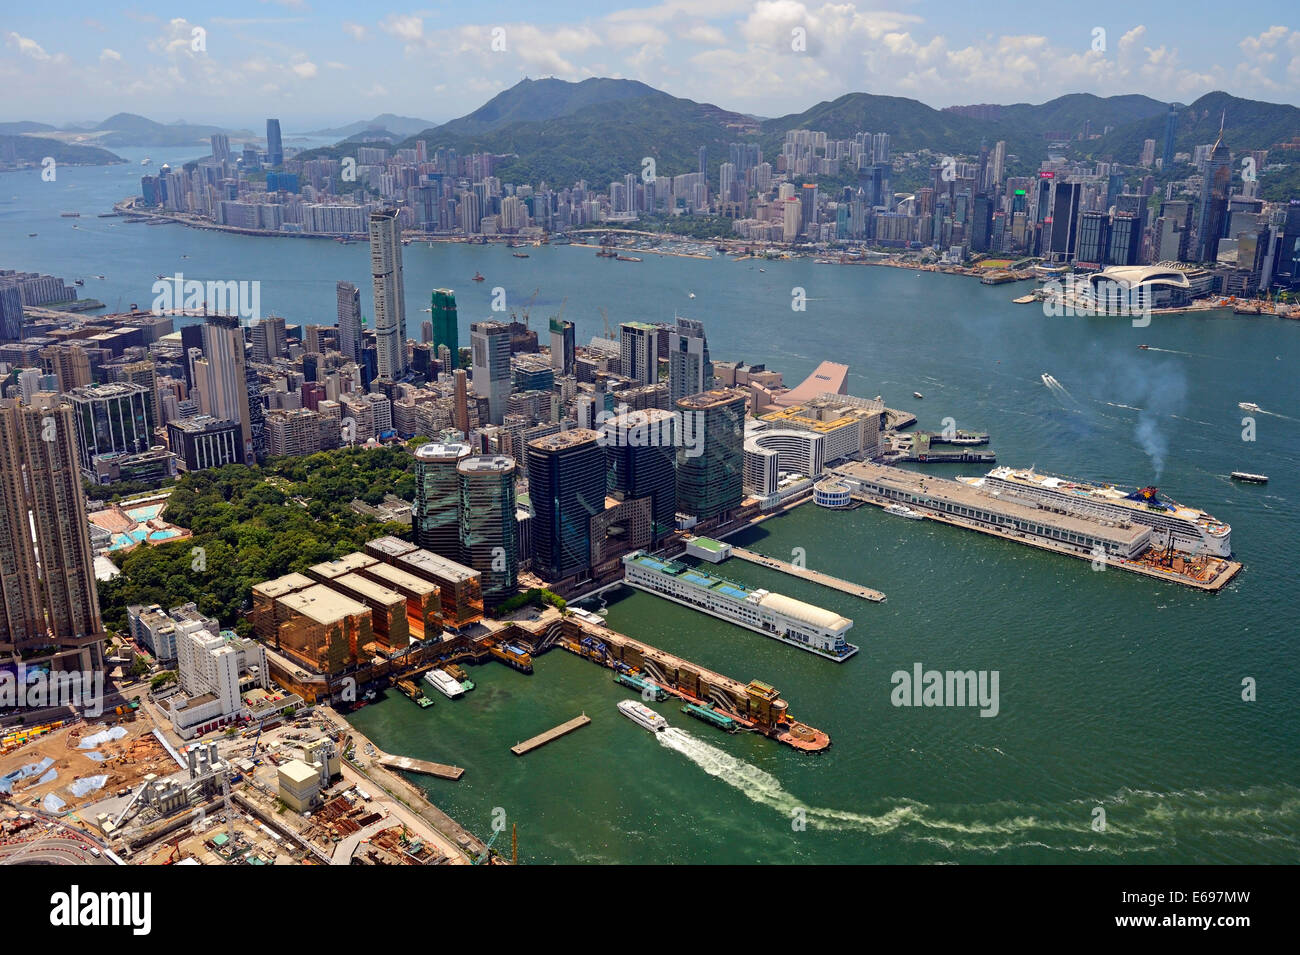 View of the port facilities of Kowloon and the Hong River, from the ...